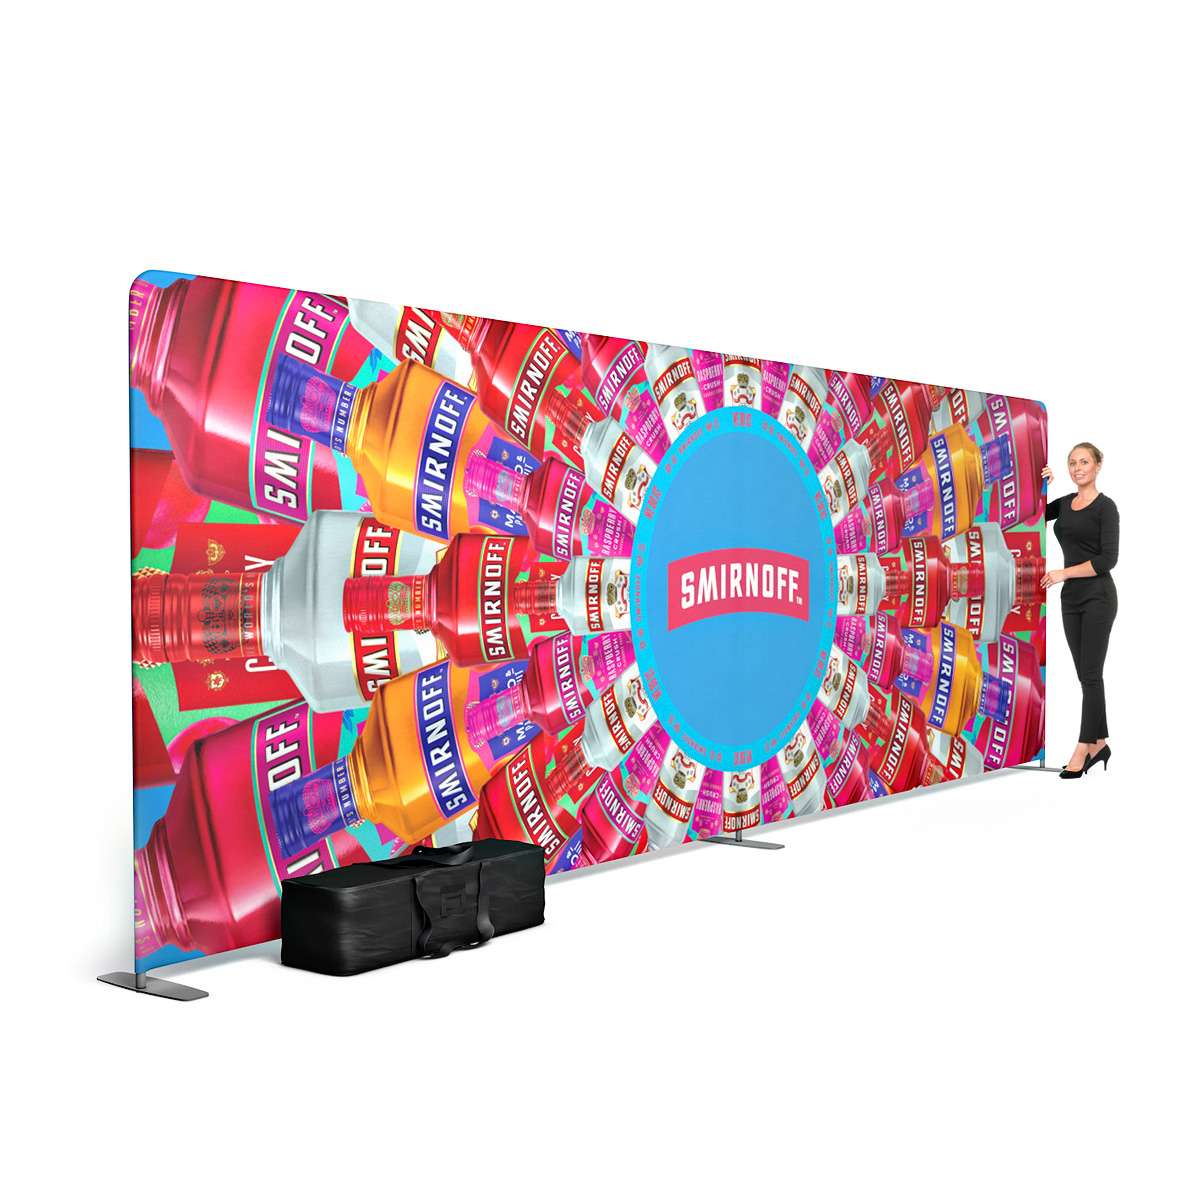 FABRIWALL® Tension Fabric Exhibition Stand Backwall 6m x 2m Display Backdrop